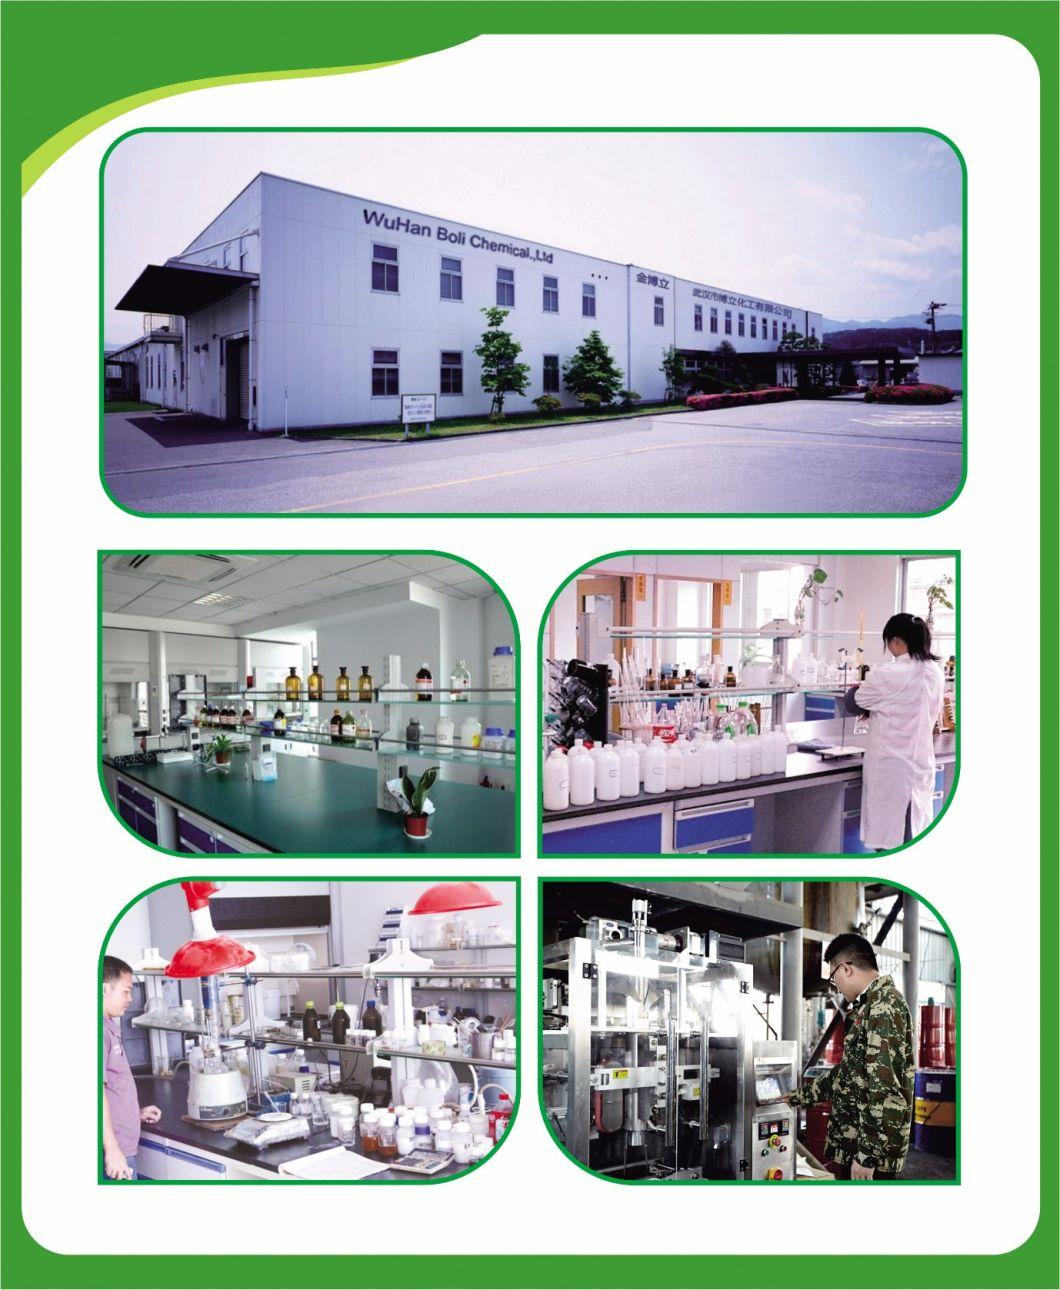 High quality Non Toxic Spray Adhesive for Sponge (China adhesive supplier/GBL adhesive)